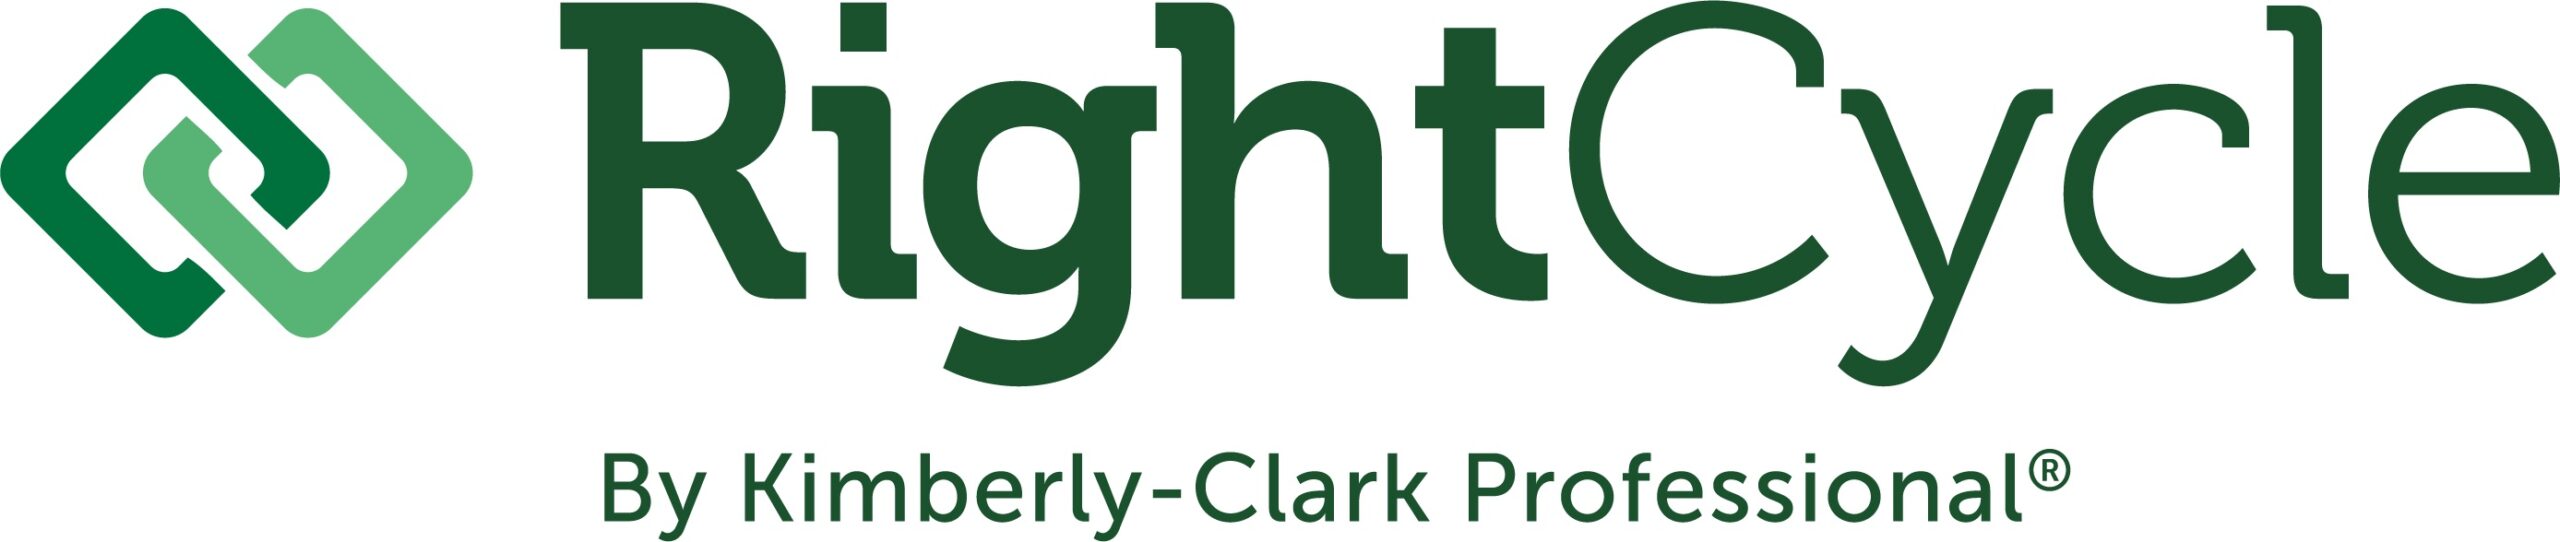 Kimberly-Clark Professional expands RightCycle programme